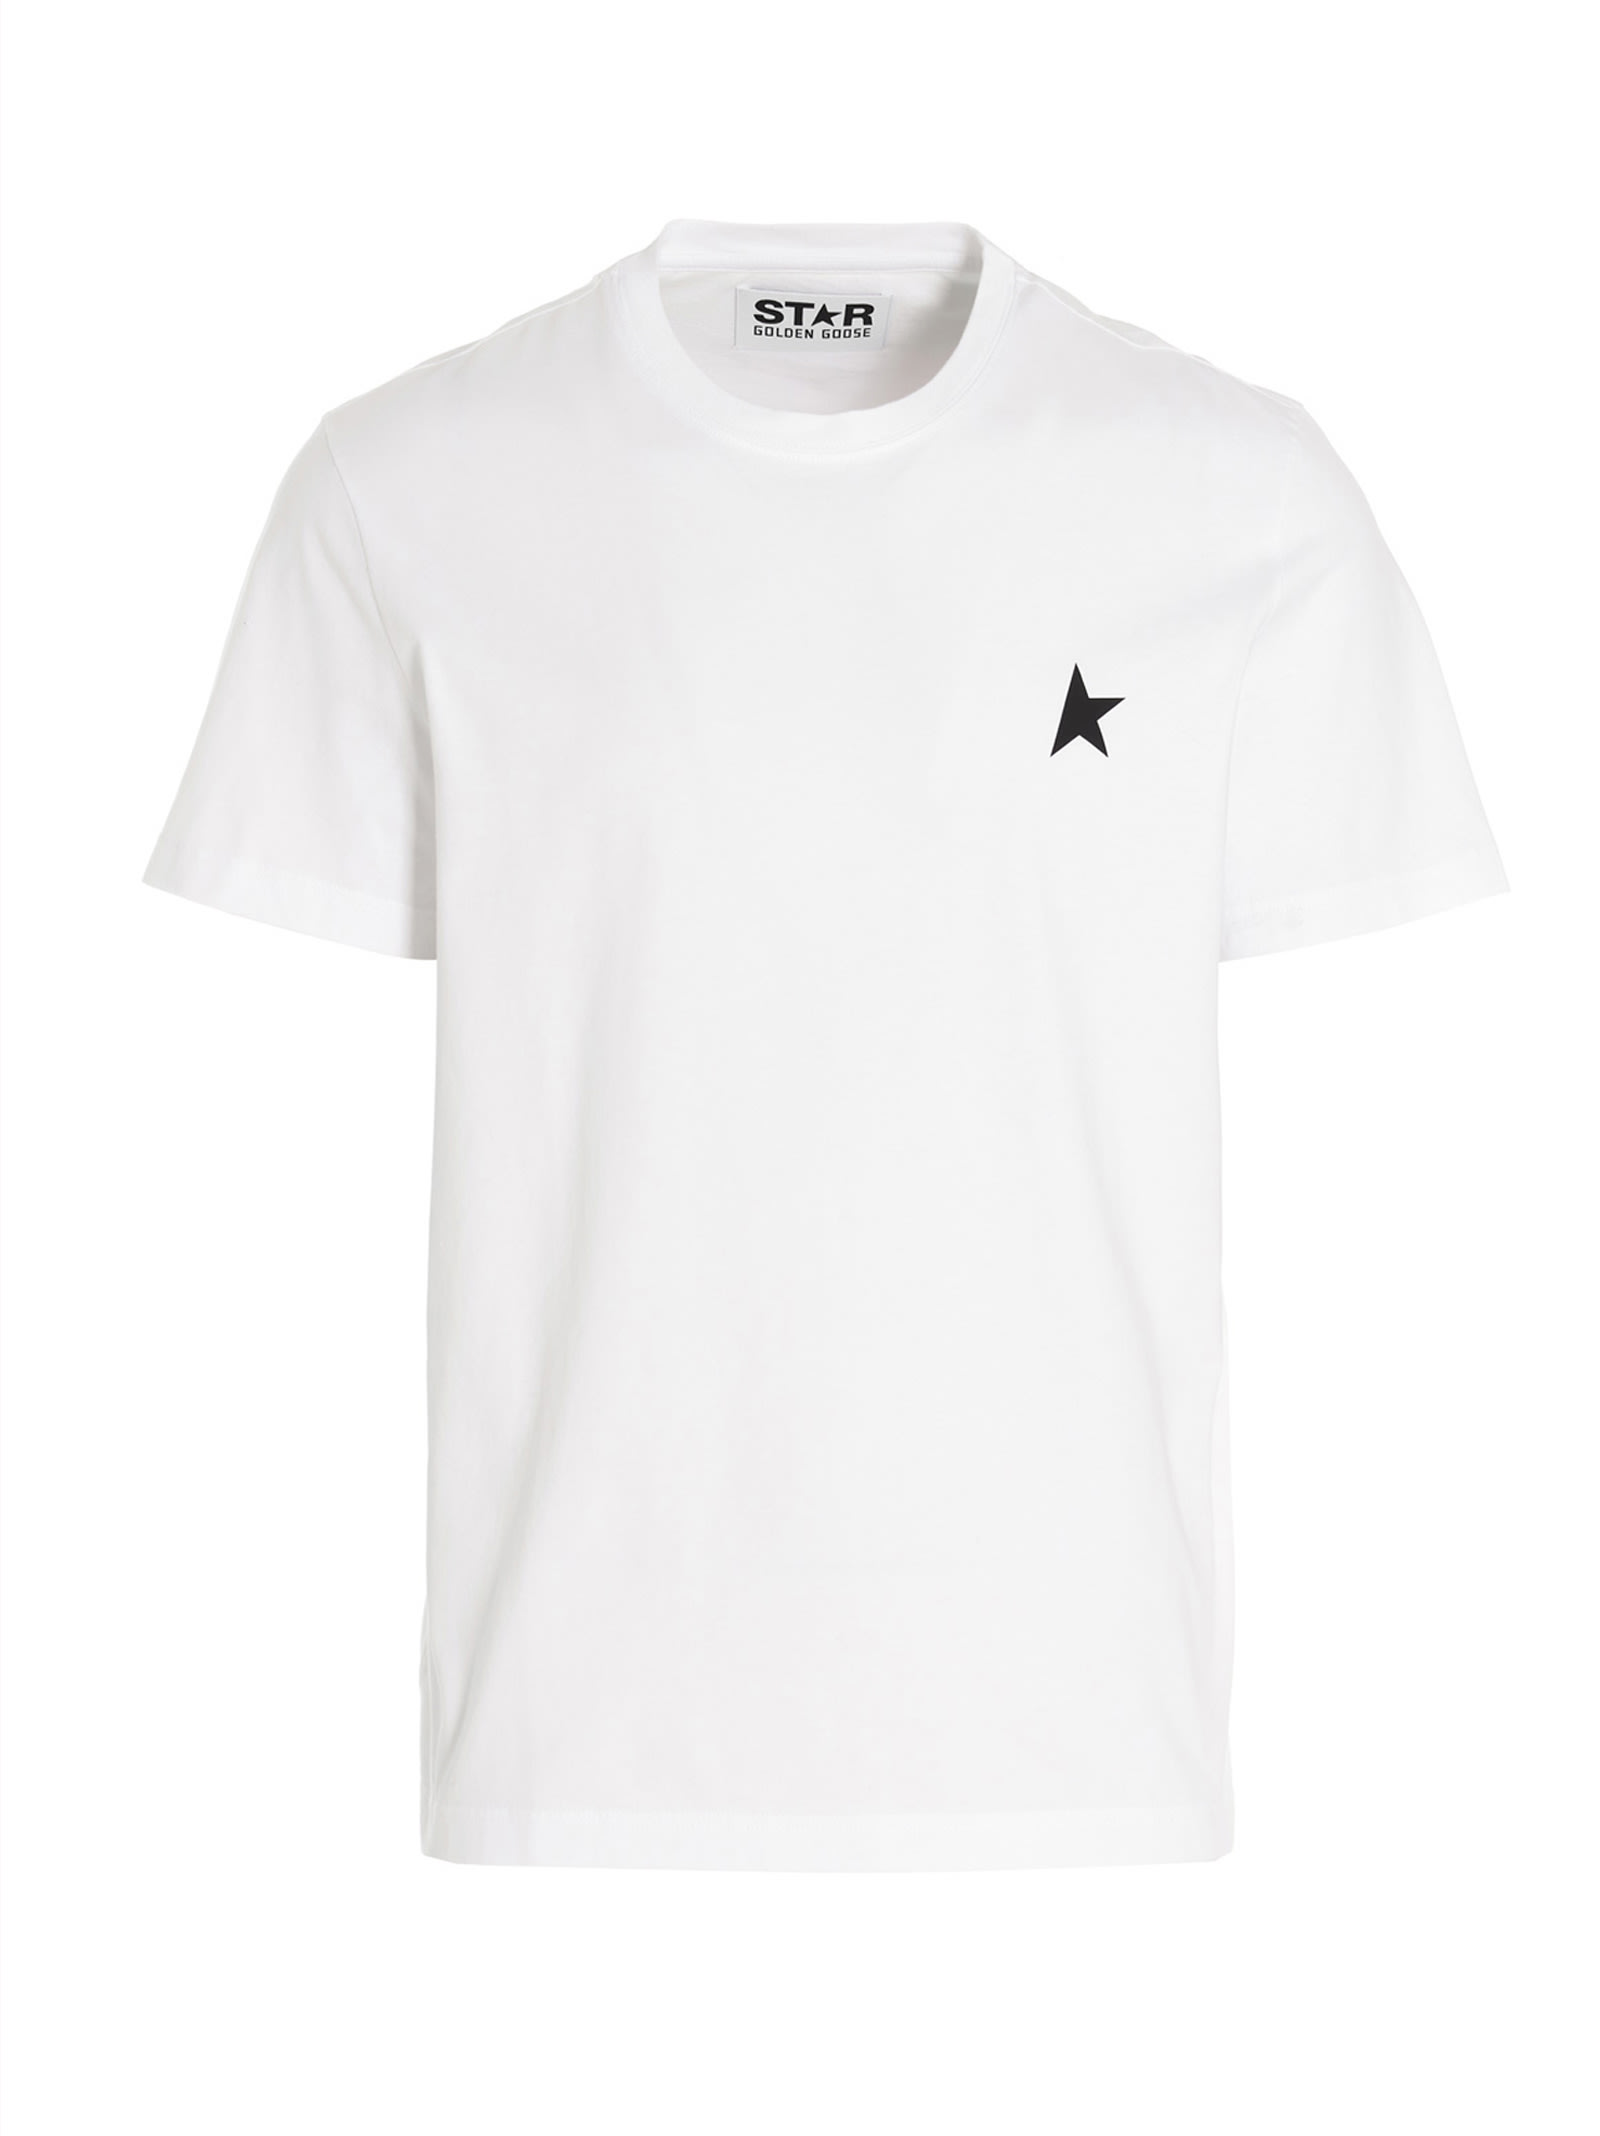 Golden Goose T-shirt 'small Star' | italist, ALWAYS LIKE A SALE